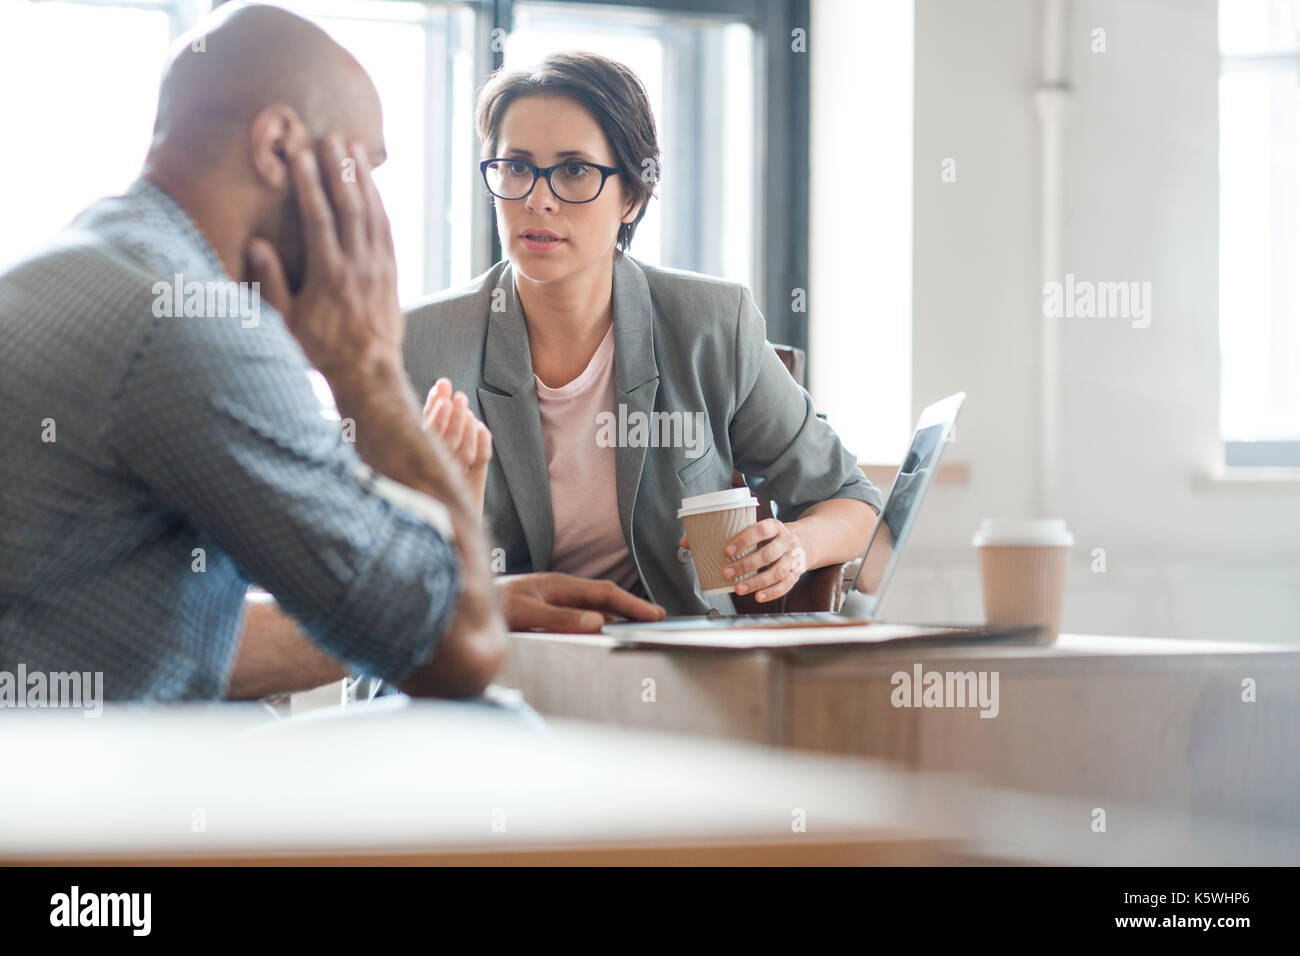 Discussing problems Stock Photo